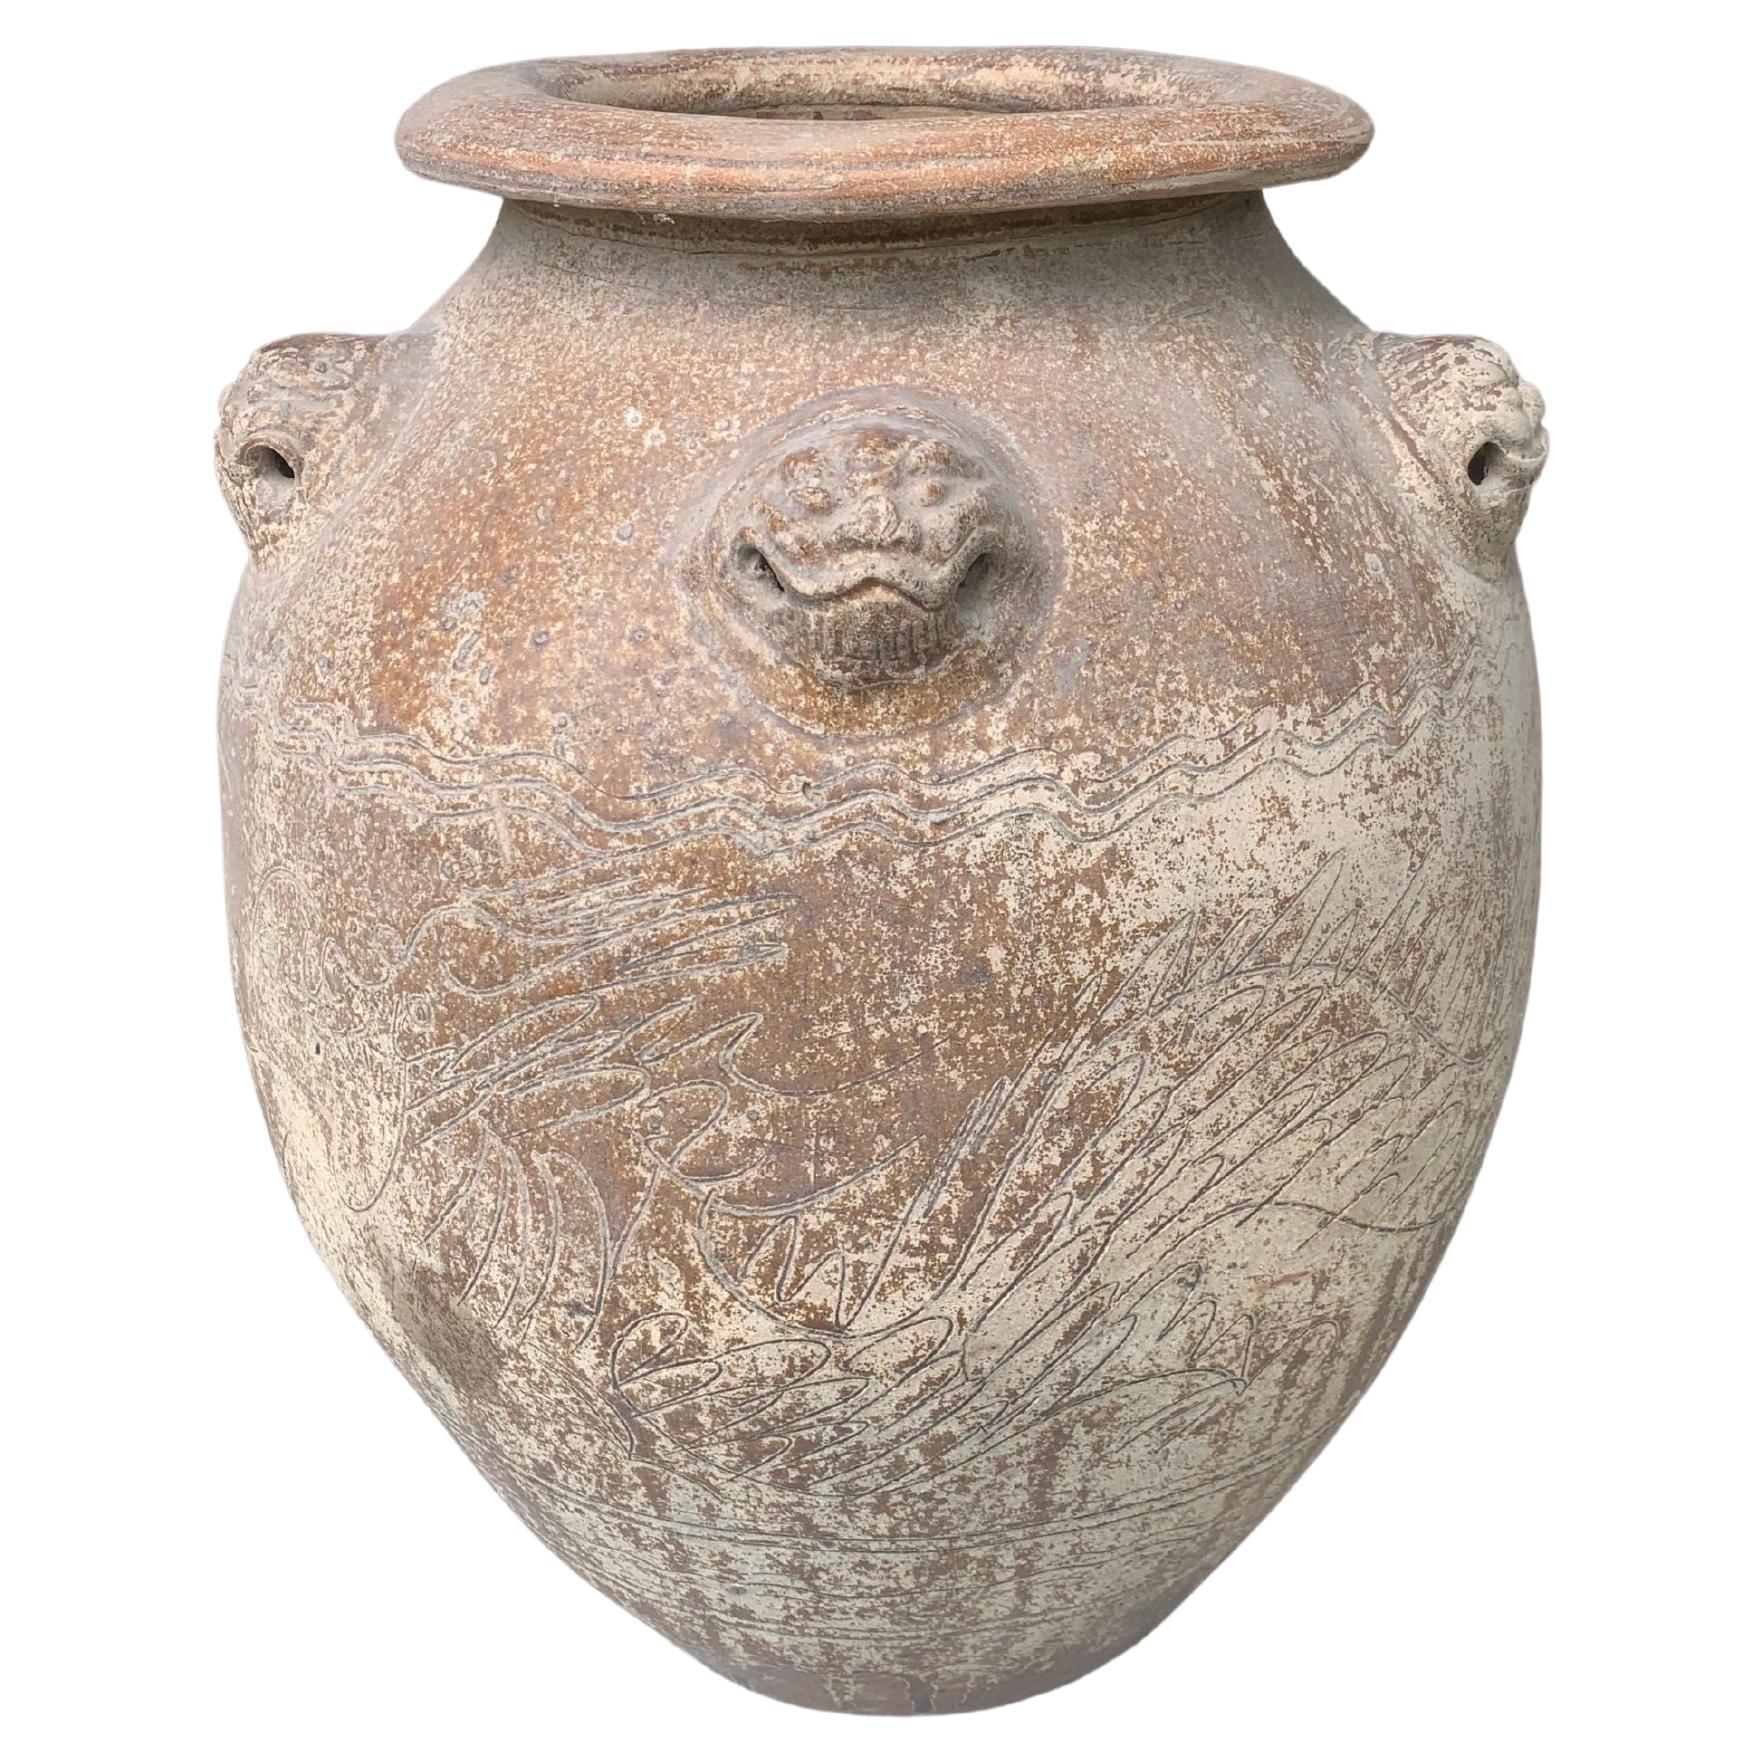 Chinese Earth Coloured Ceramic Jar / Planter with Tiger Medallions, c. 1900